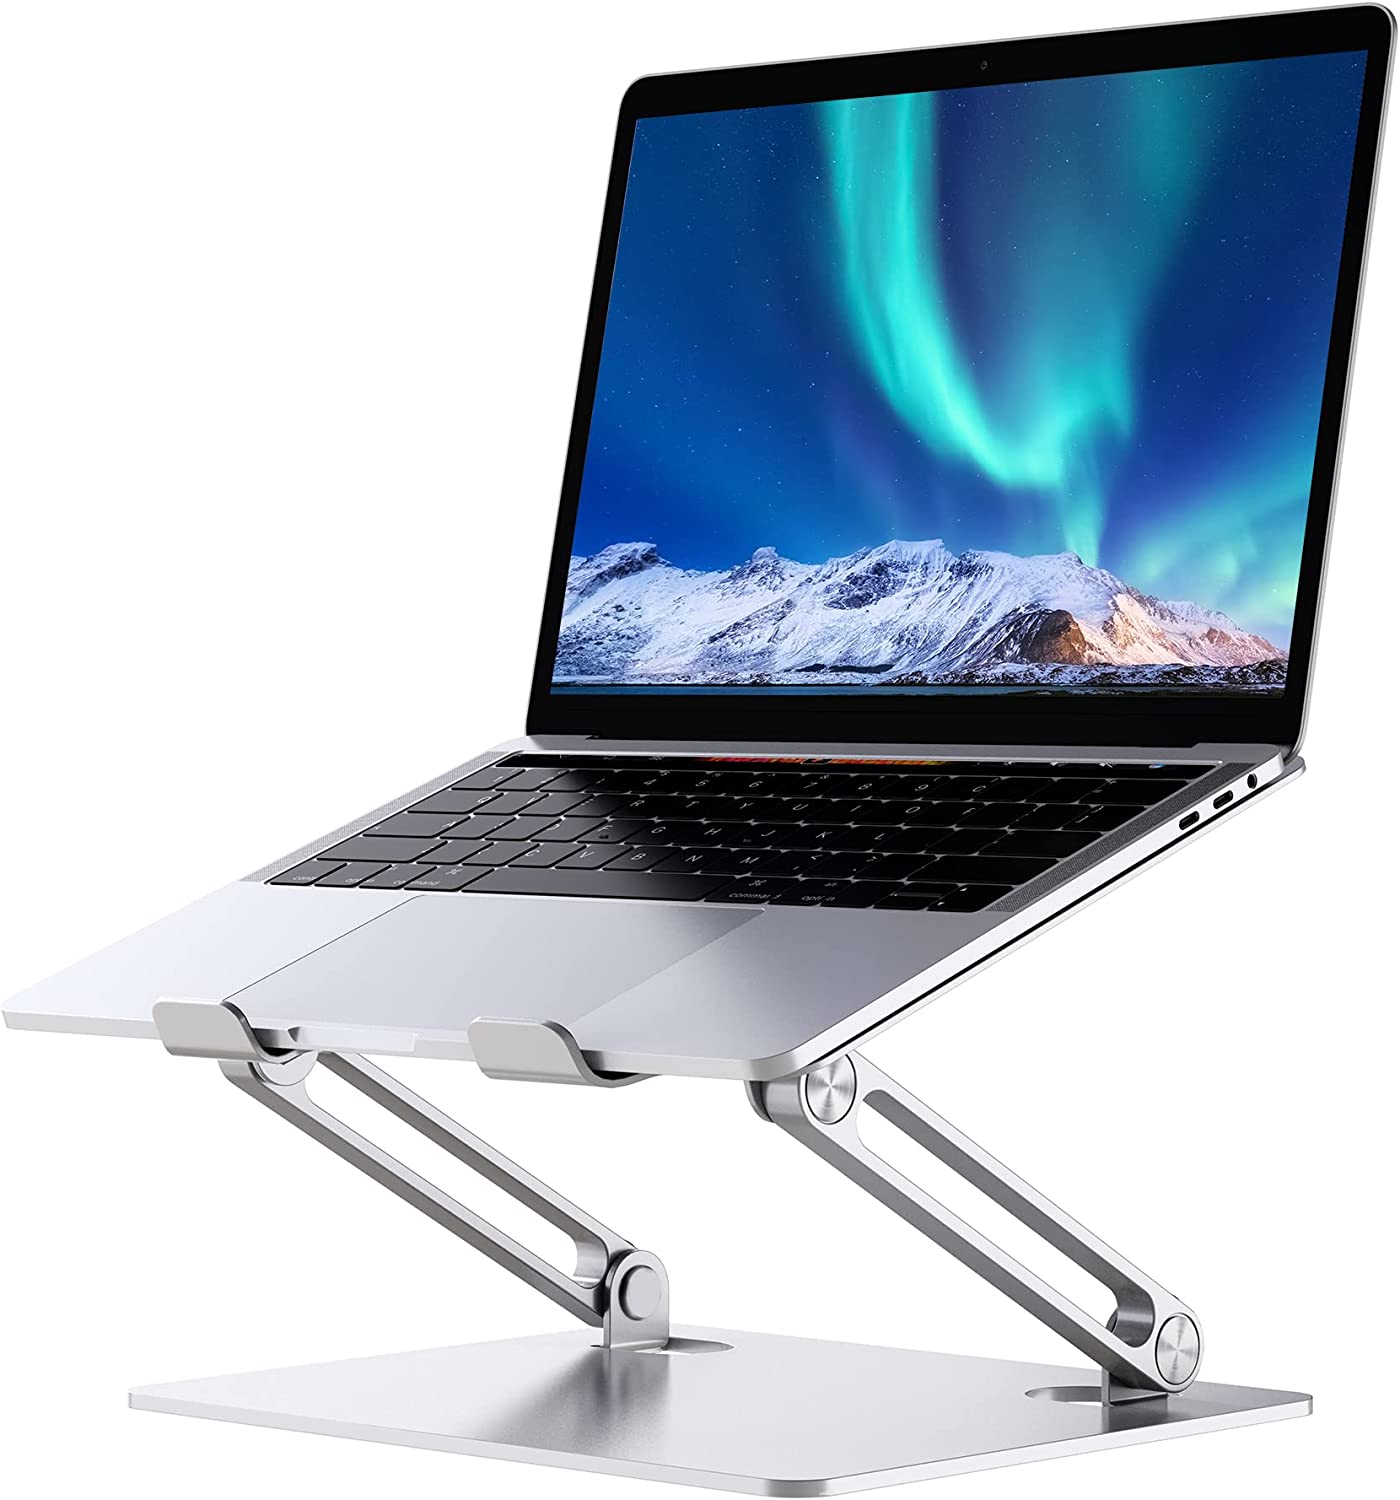 SOUNDANCE Laptop Stand for Desk with Stable Heavy [...]